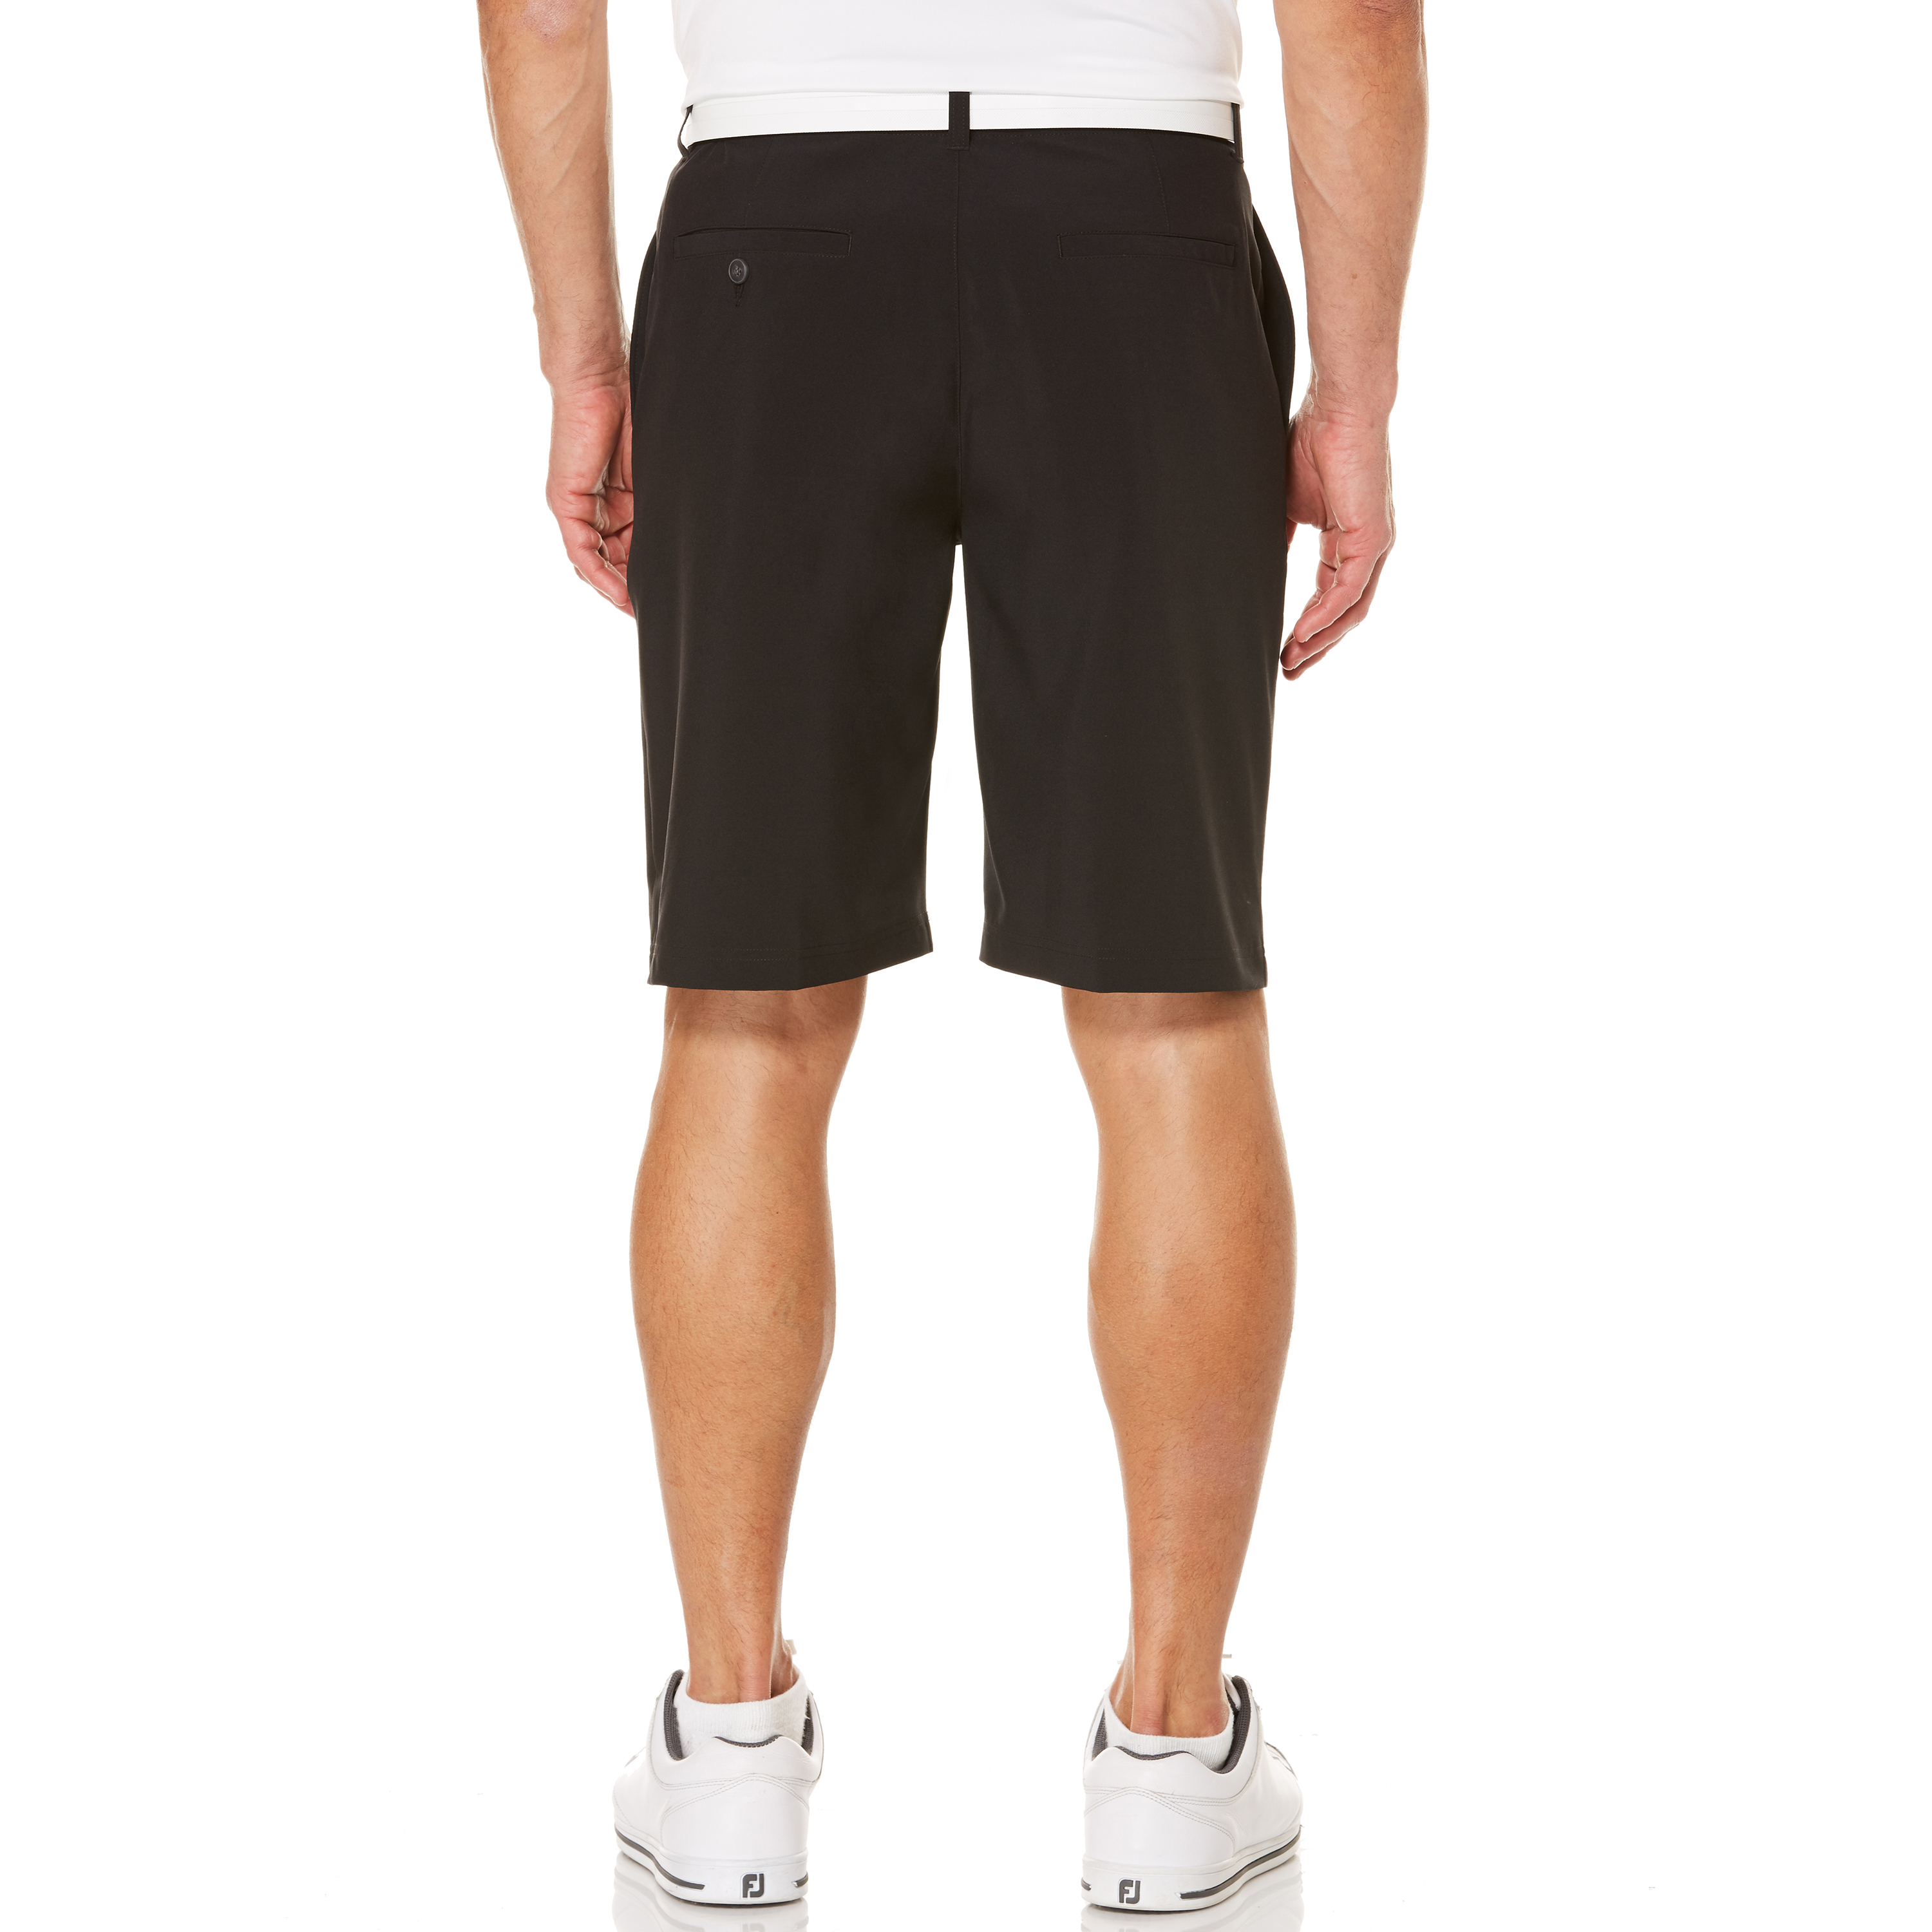 Ben Hogan Performance Men's Flat Front Active Flex Stretch Golf Short, up to 54 inches - image 4 of 6